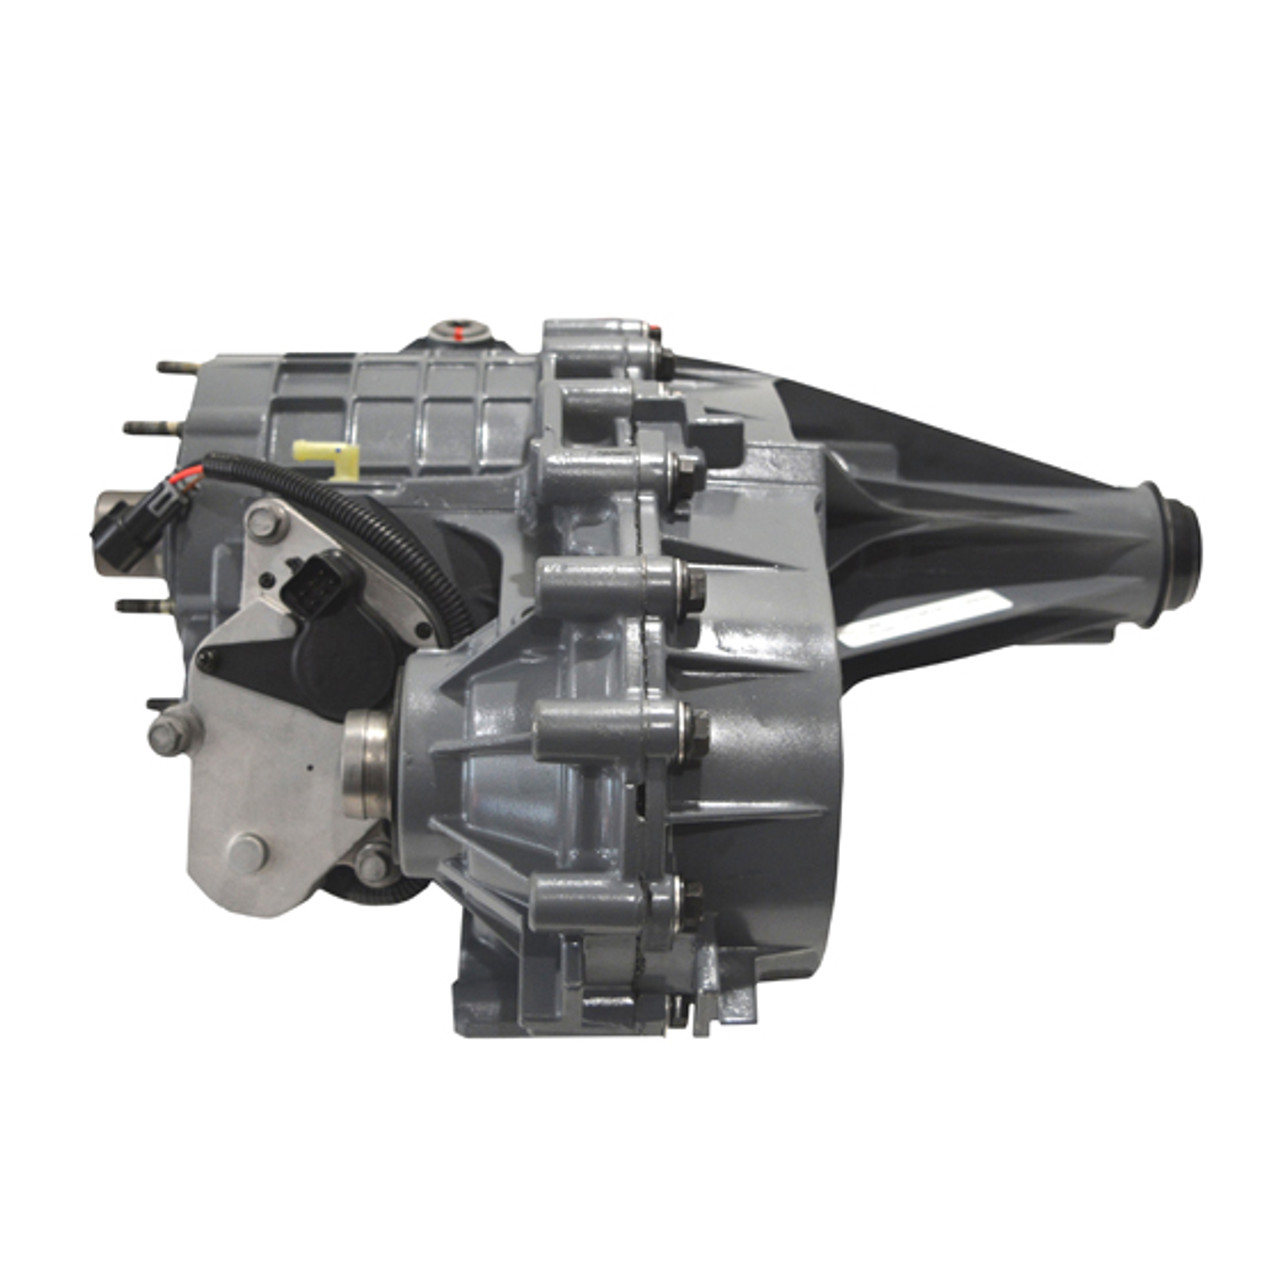 Transfer Case for 1999-2002 General Motors with 4L80E